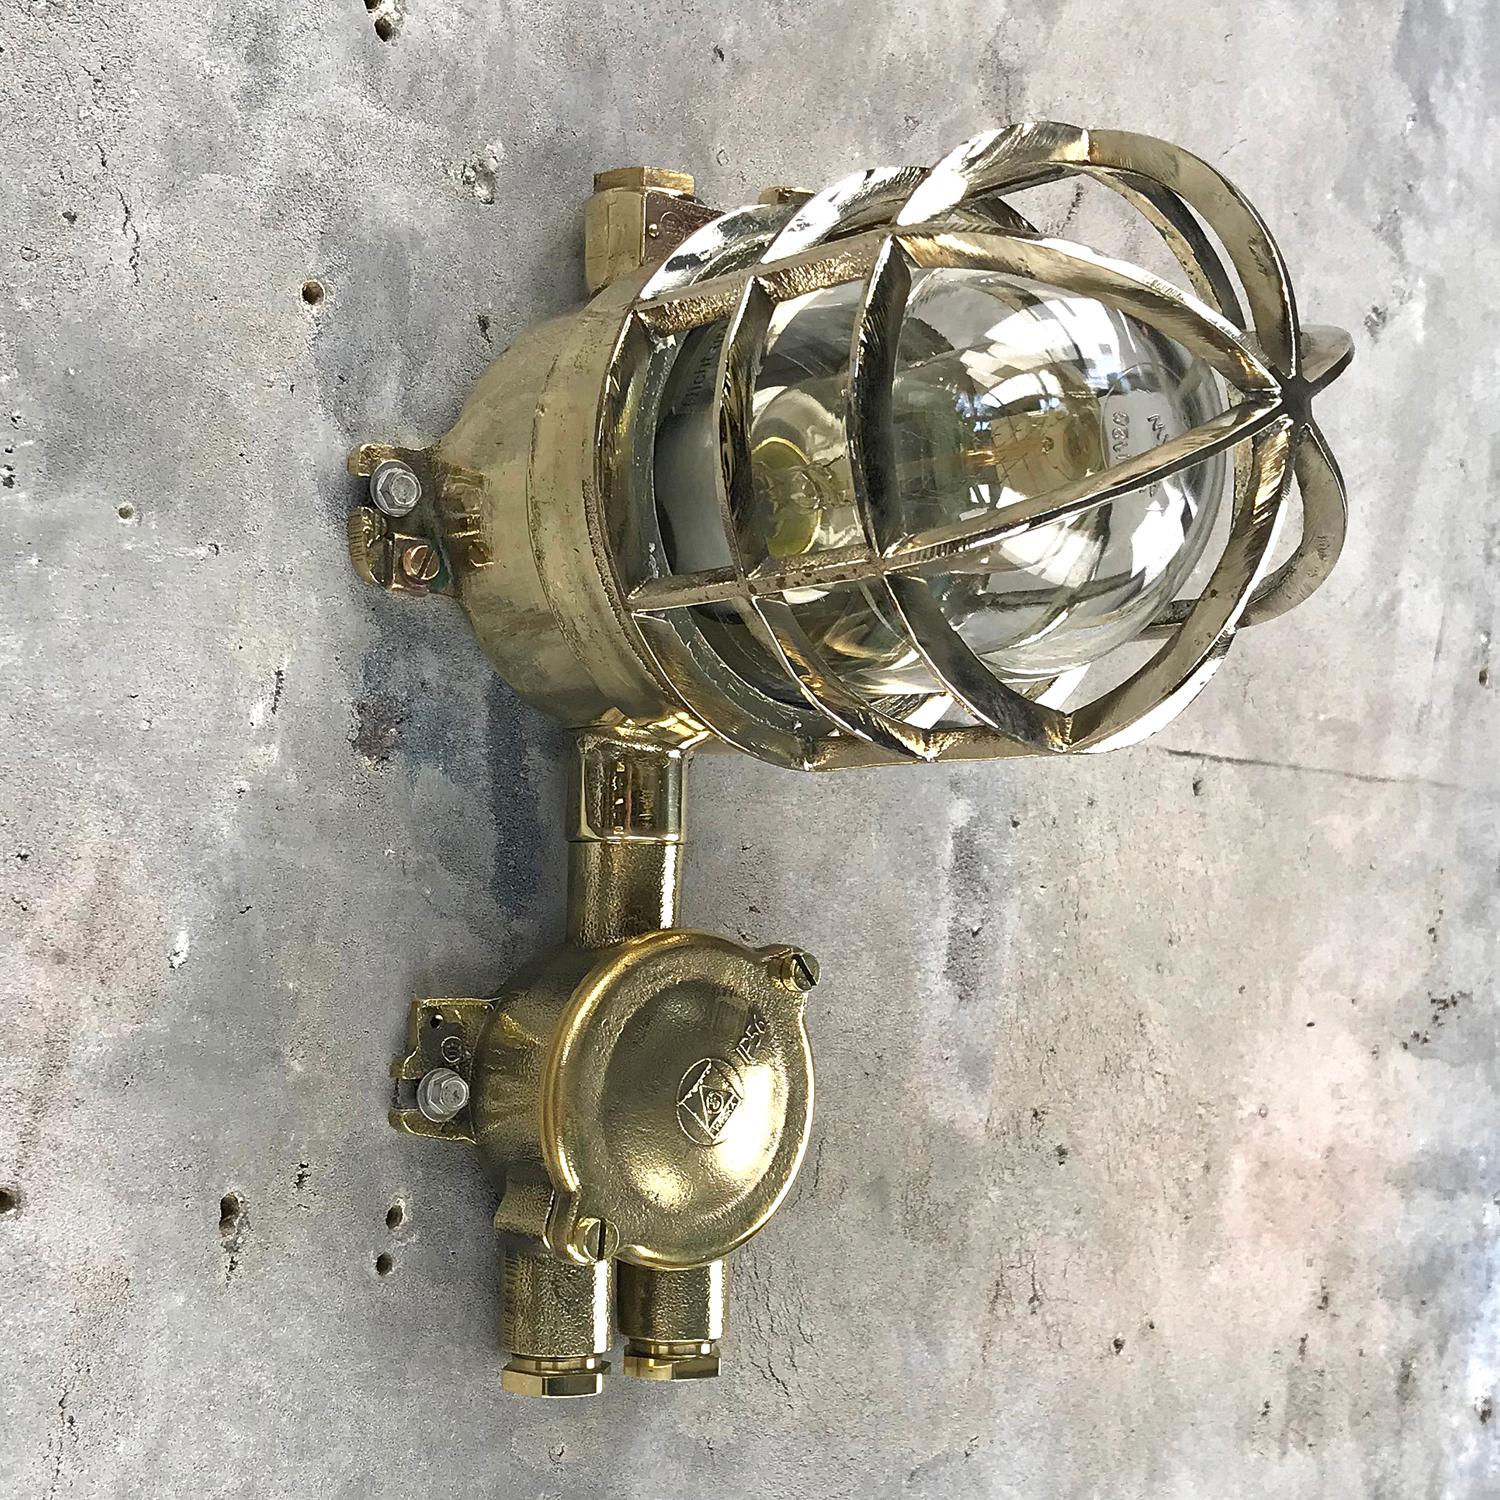 Industrial 1970s German Explosion Proof Wall Light Cast Brass, Glass Shade and Junction Box